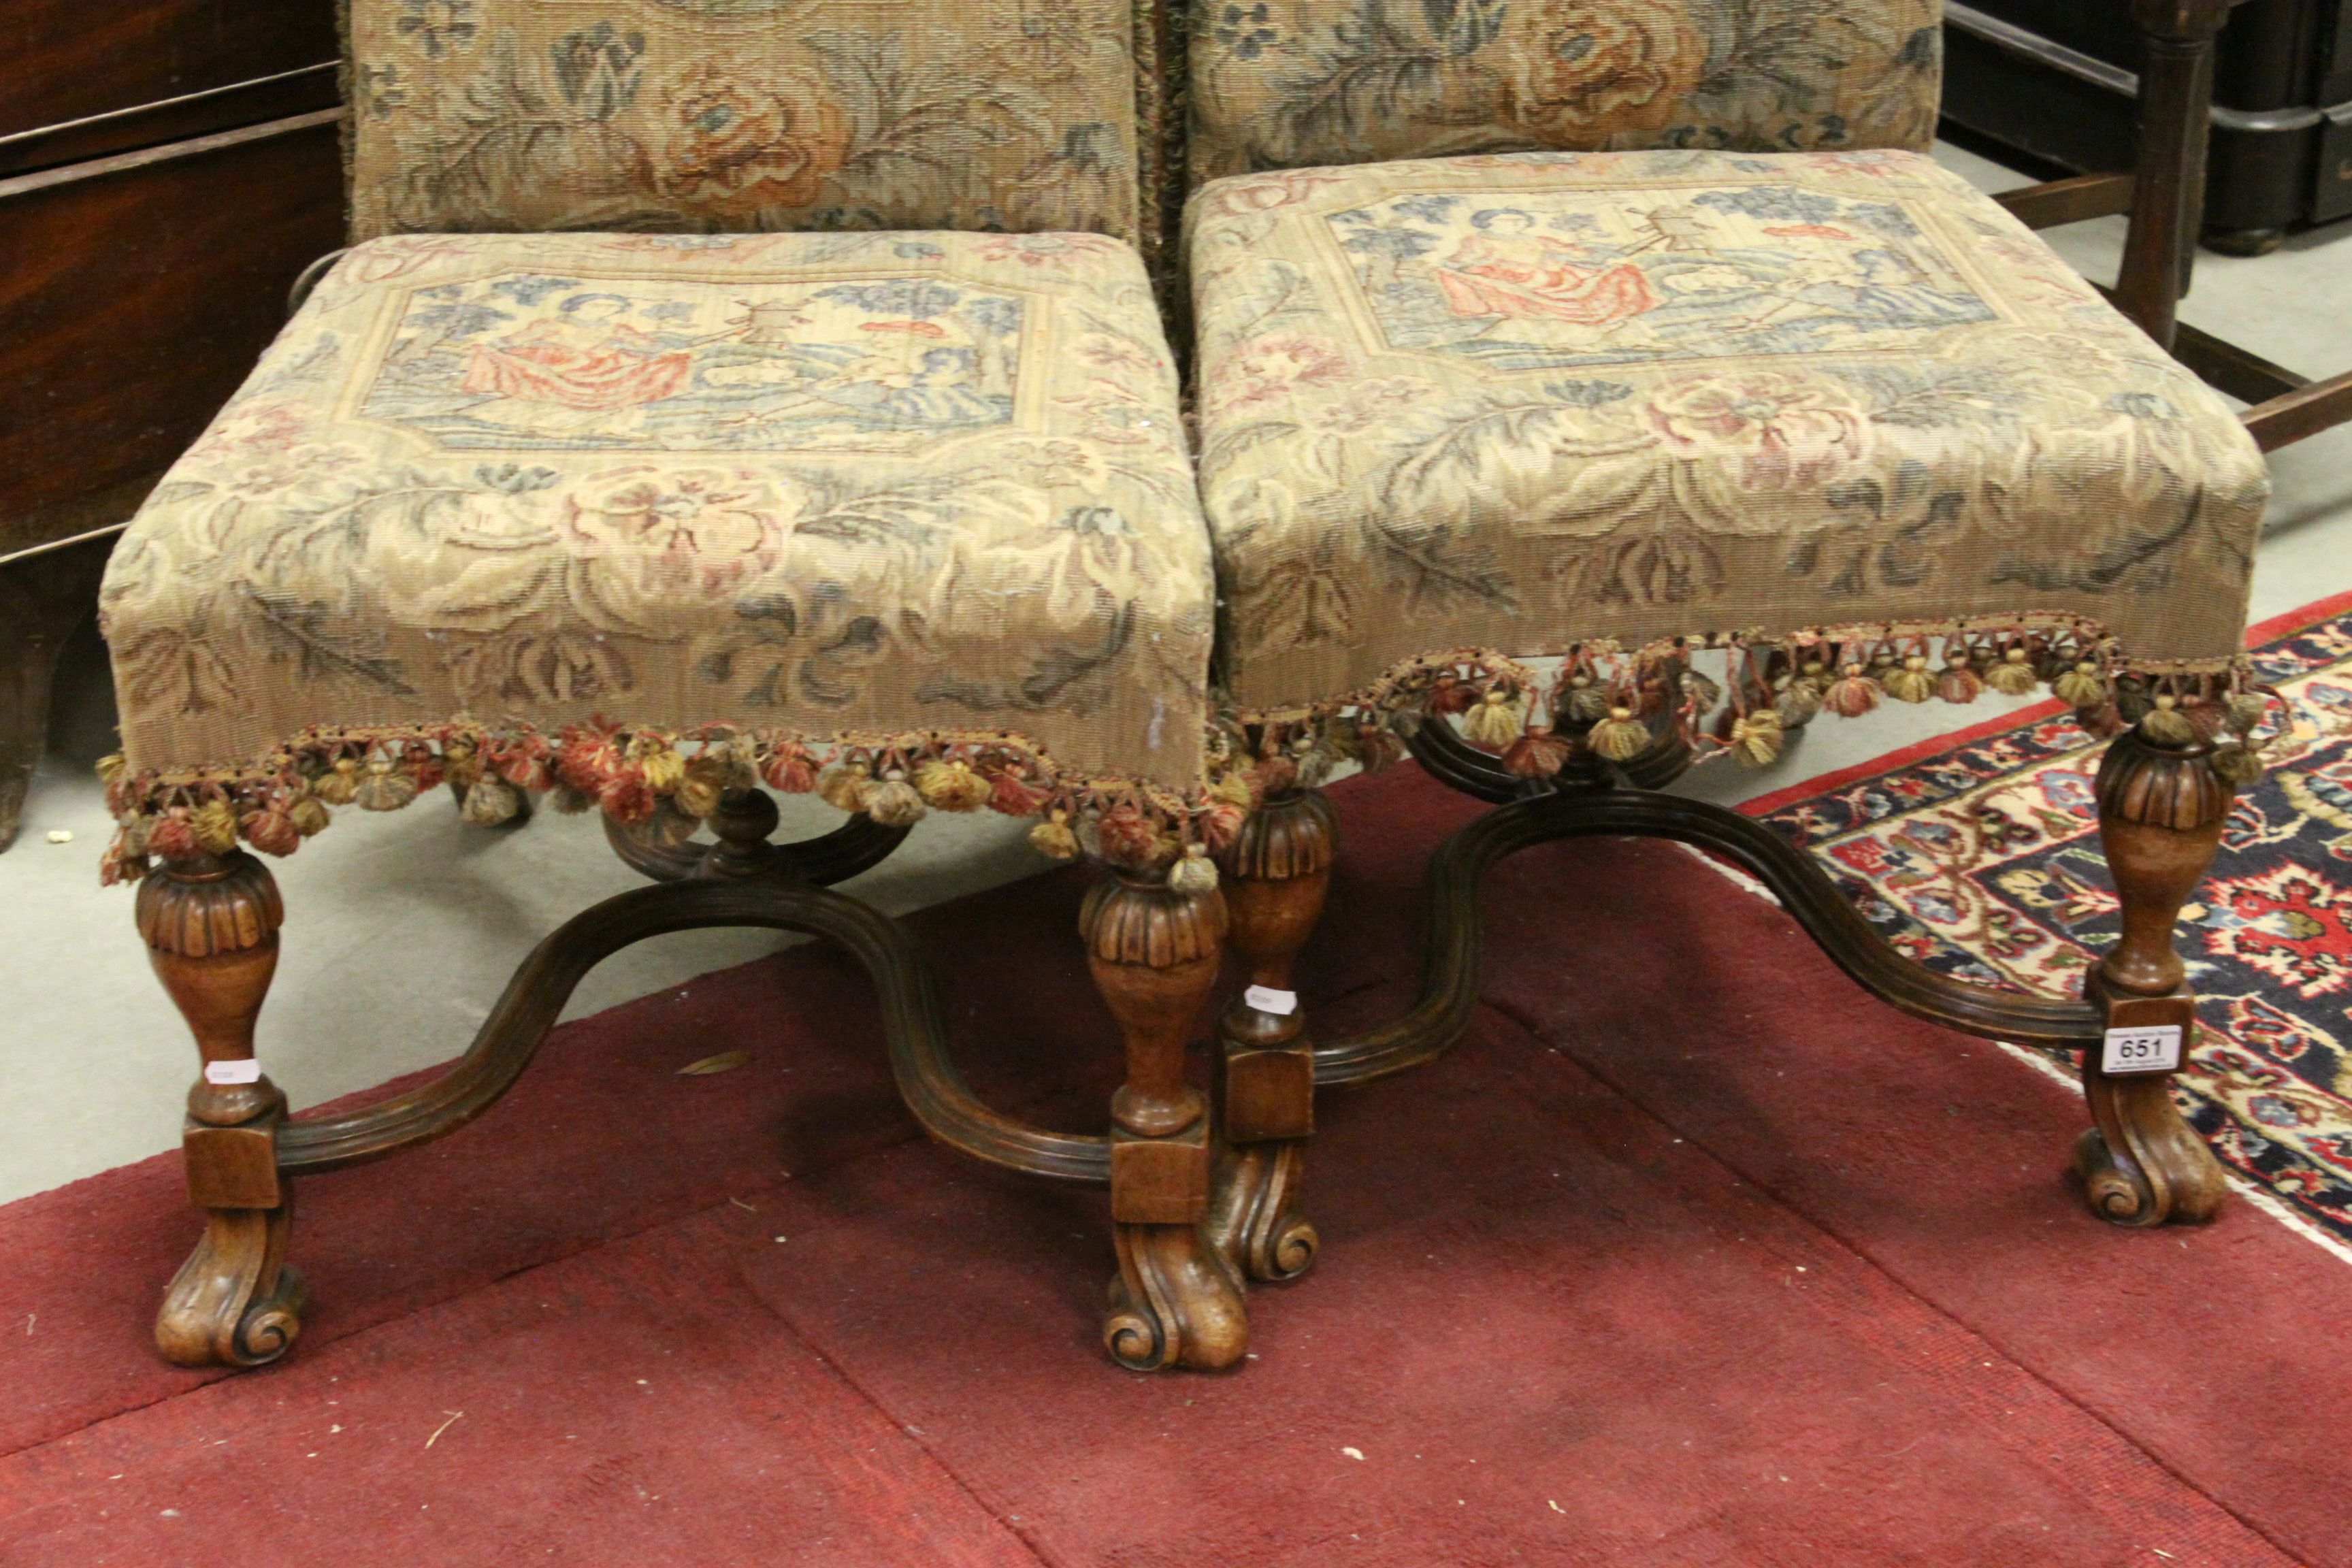 Pair of 17th century Style Chairs, the needlework covered seat and back with fringes and tassles - Image 4 of 7